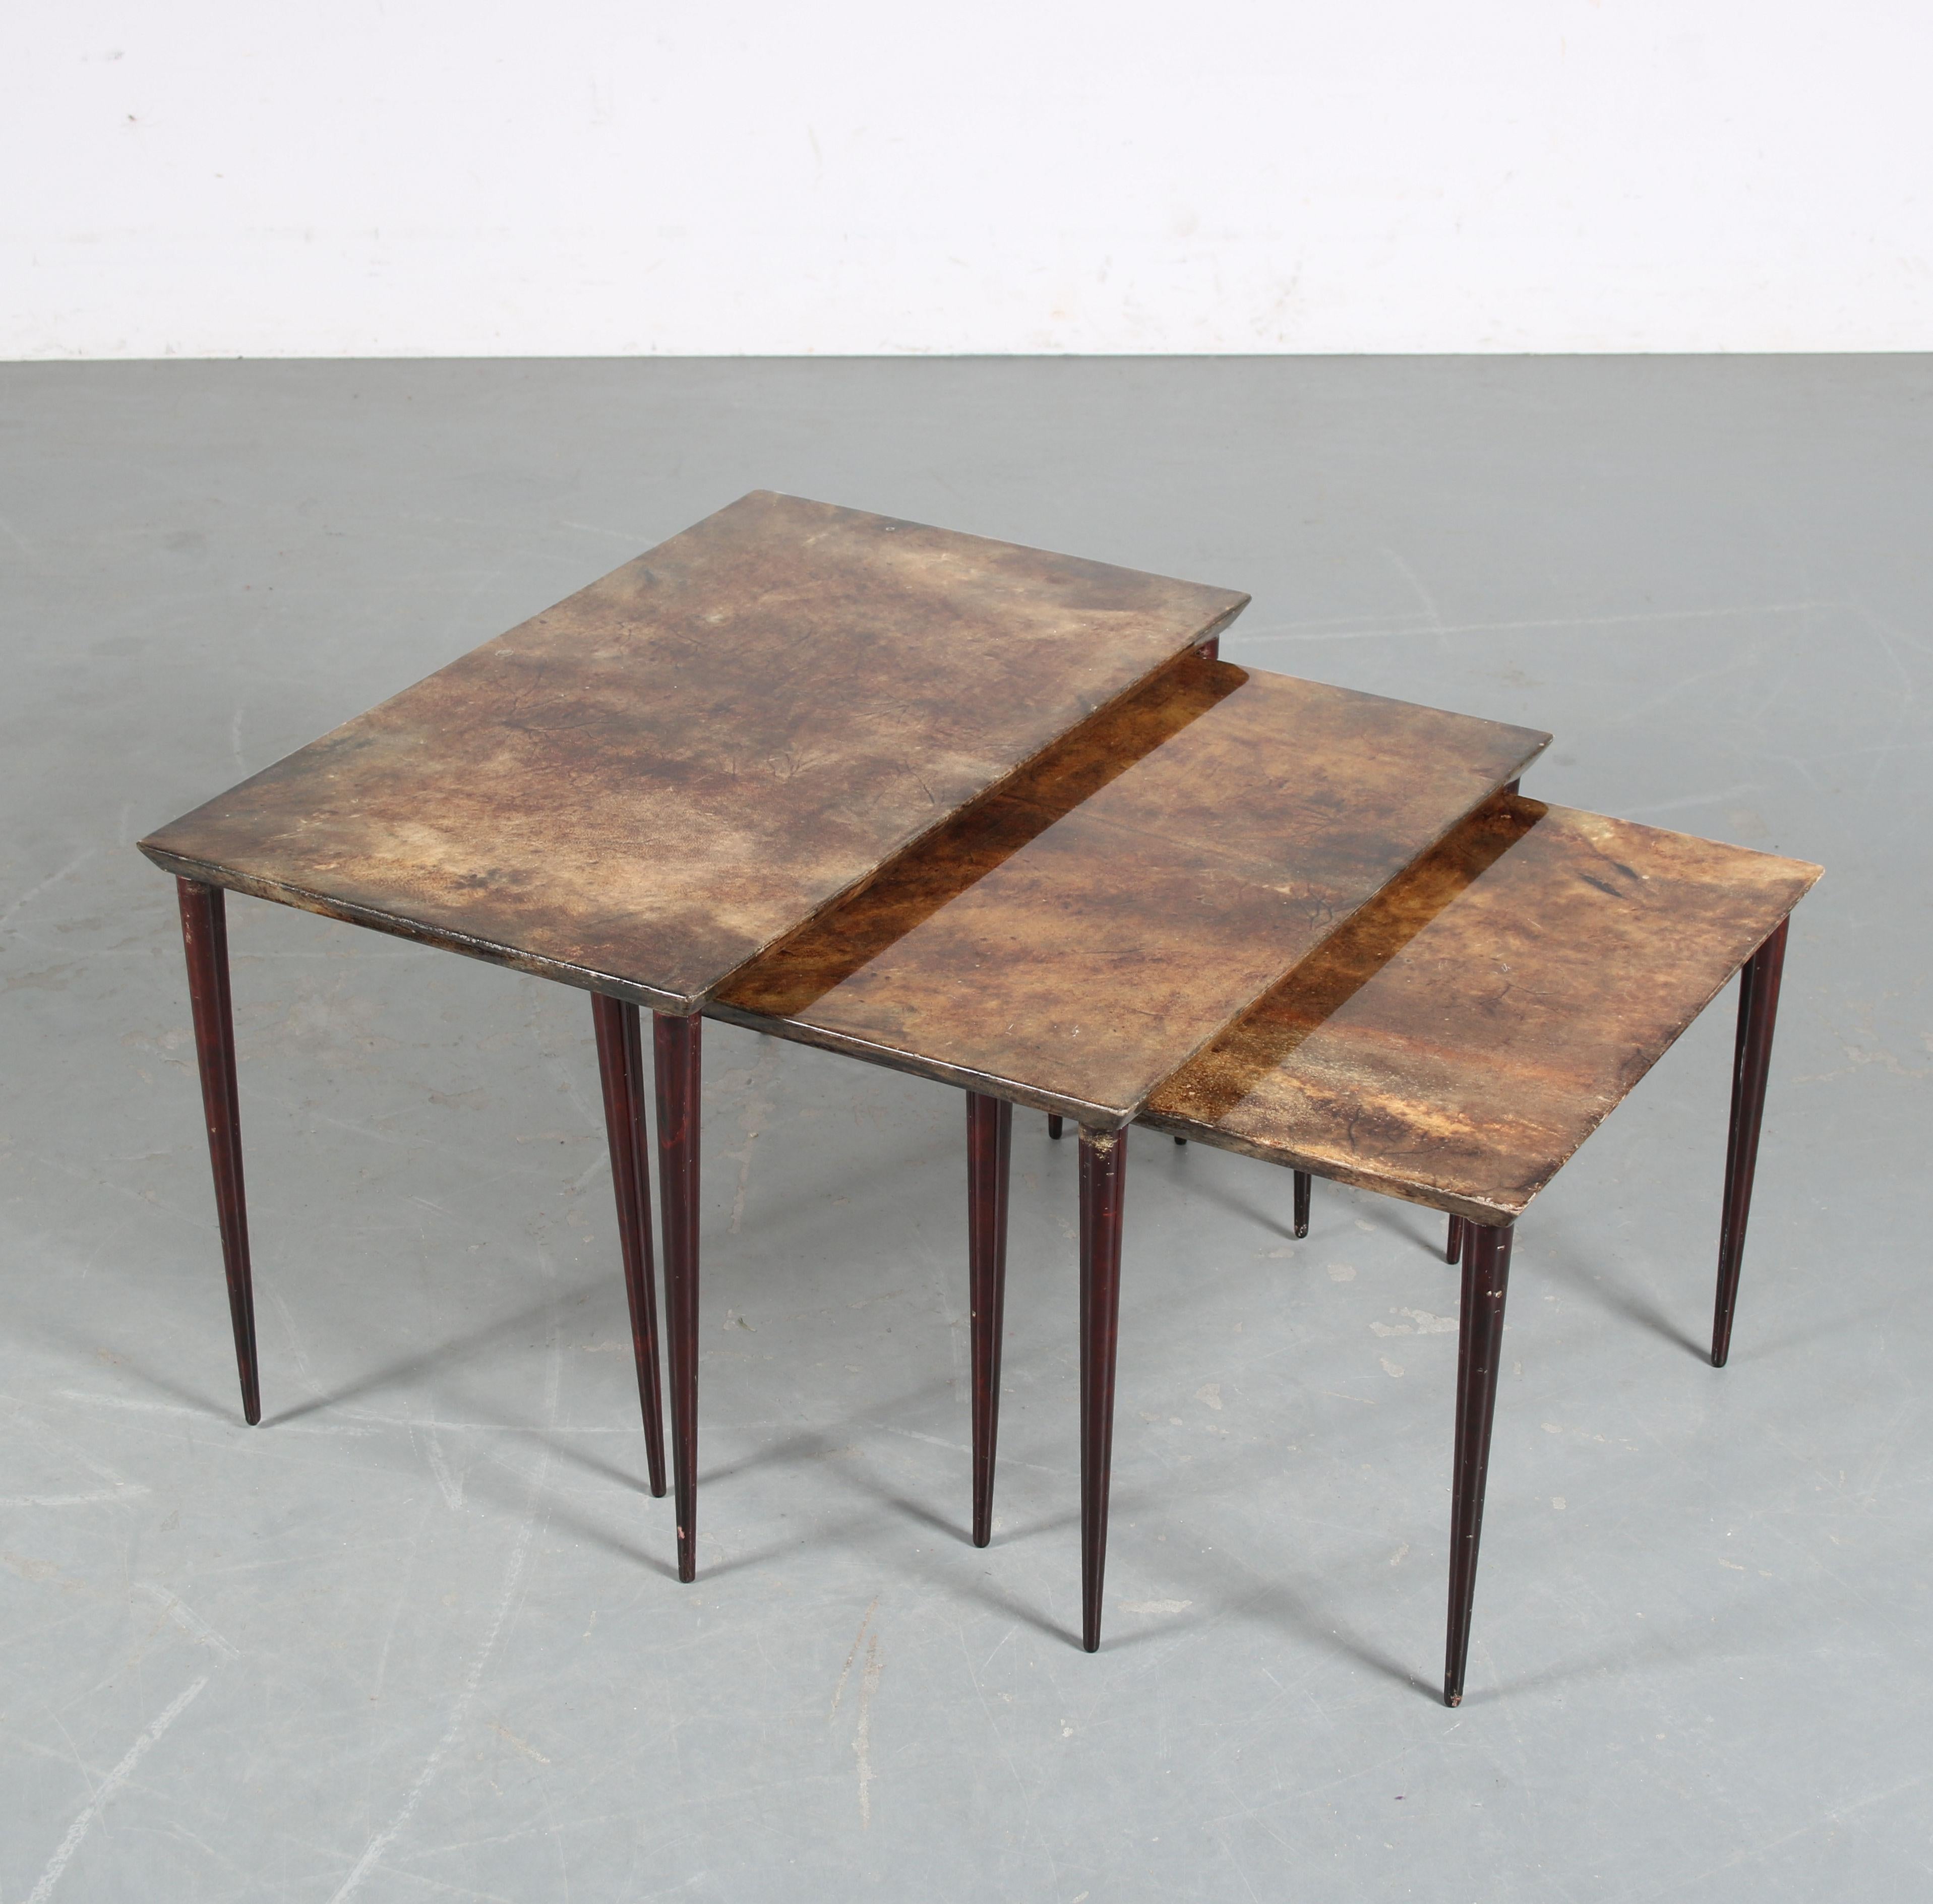 Aldo Tura Nesting Tables from Italy, 1950 In Good Condition For Sale In Amsterdam, NL